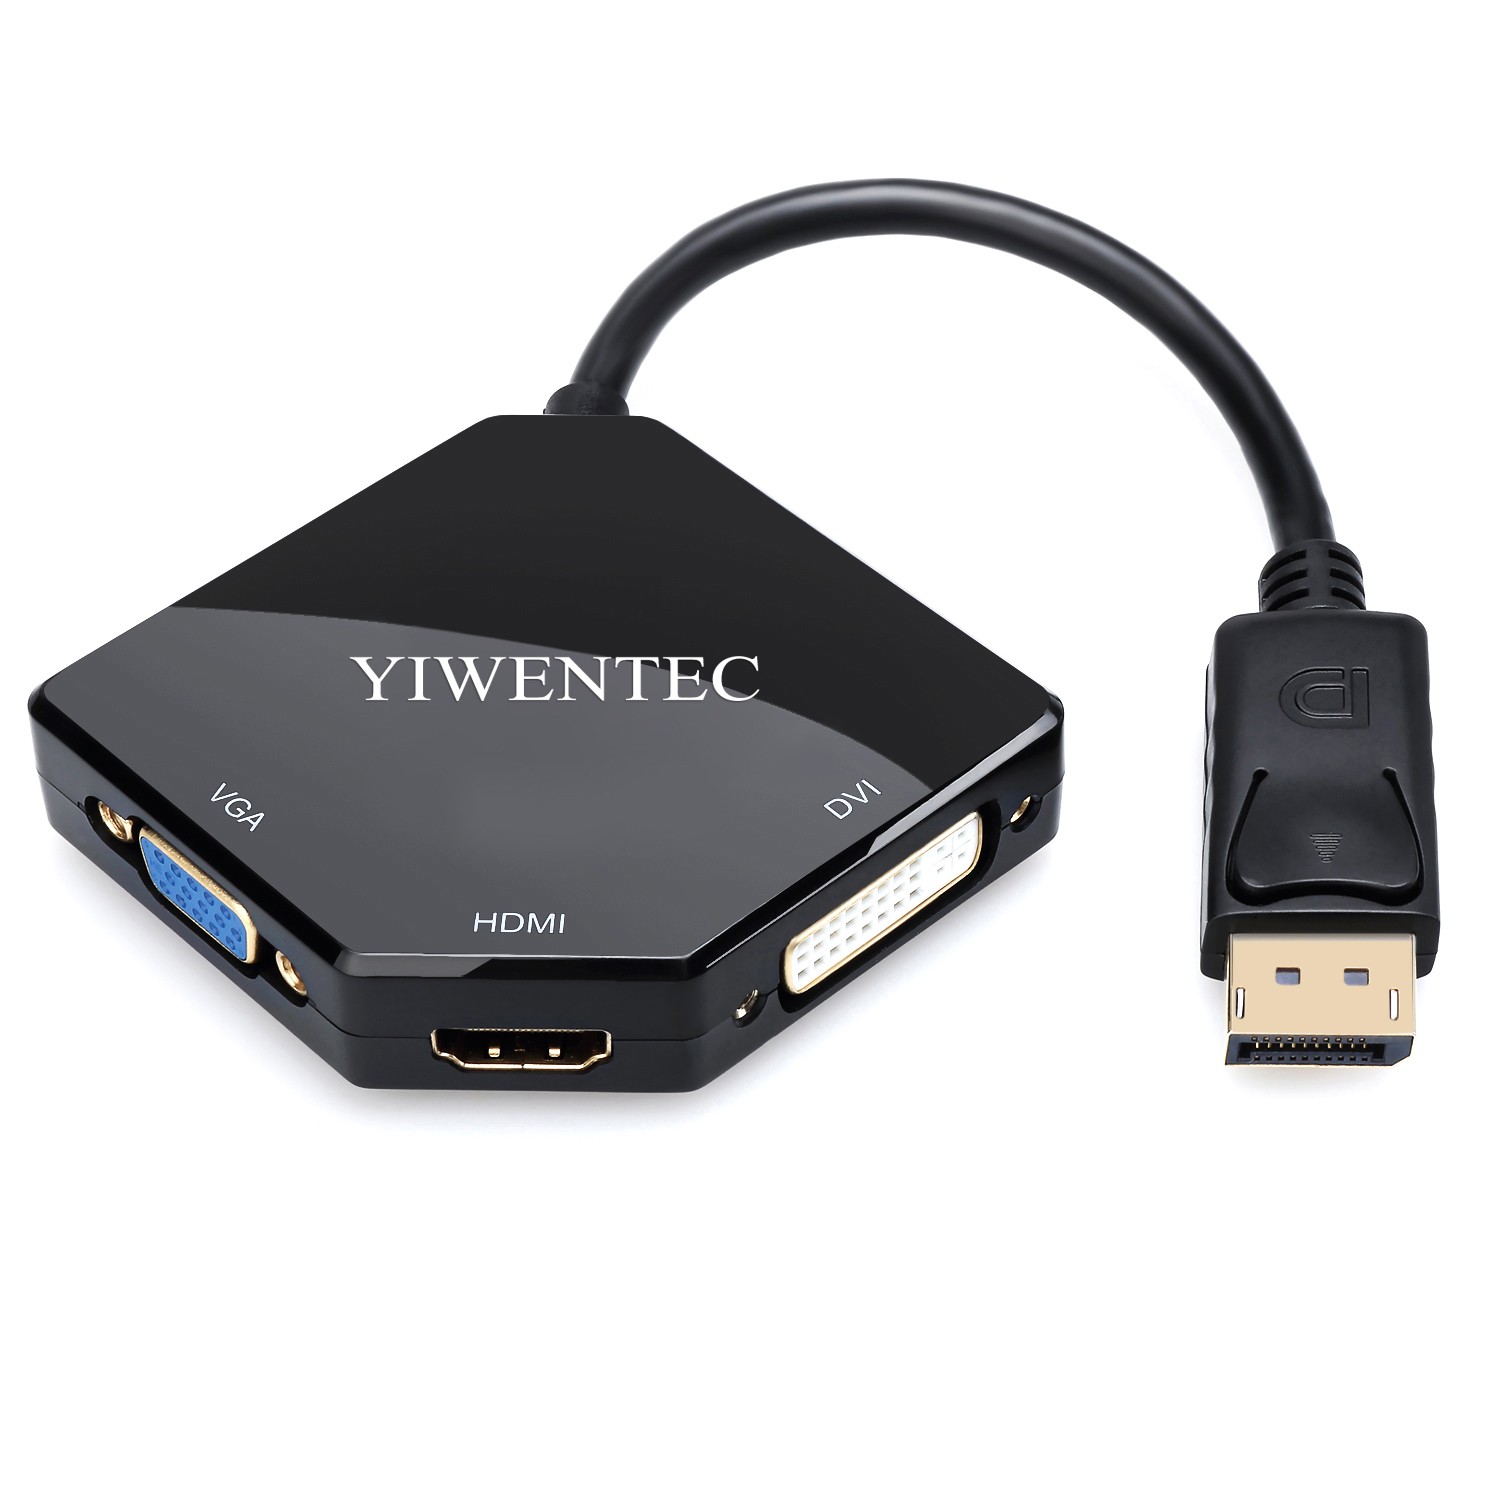 YIWENTEC displayport hub display Port to hdmi VGA DVI Adapter Cable Male to Female multi-port Converter for pc Projector hdtv B0209-Multiport Displayport to HDMI DVI VGA-YIWENTEC